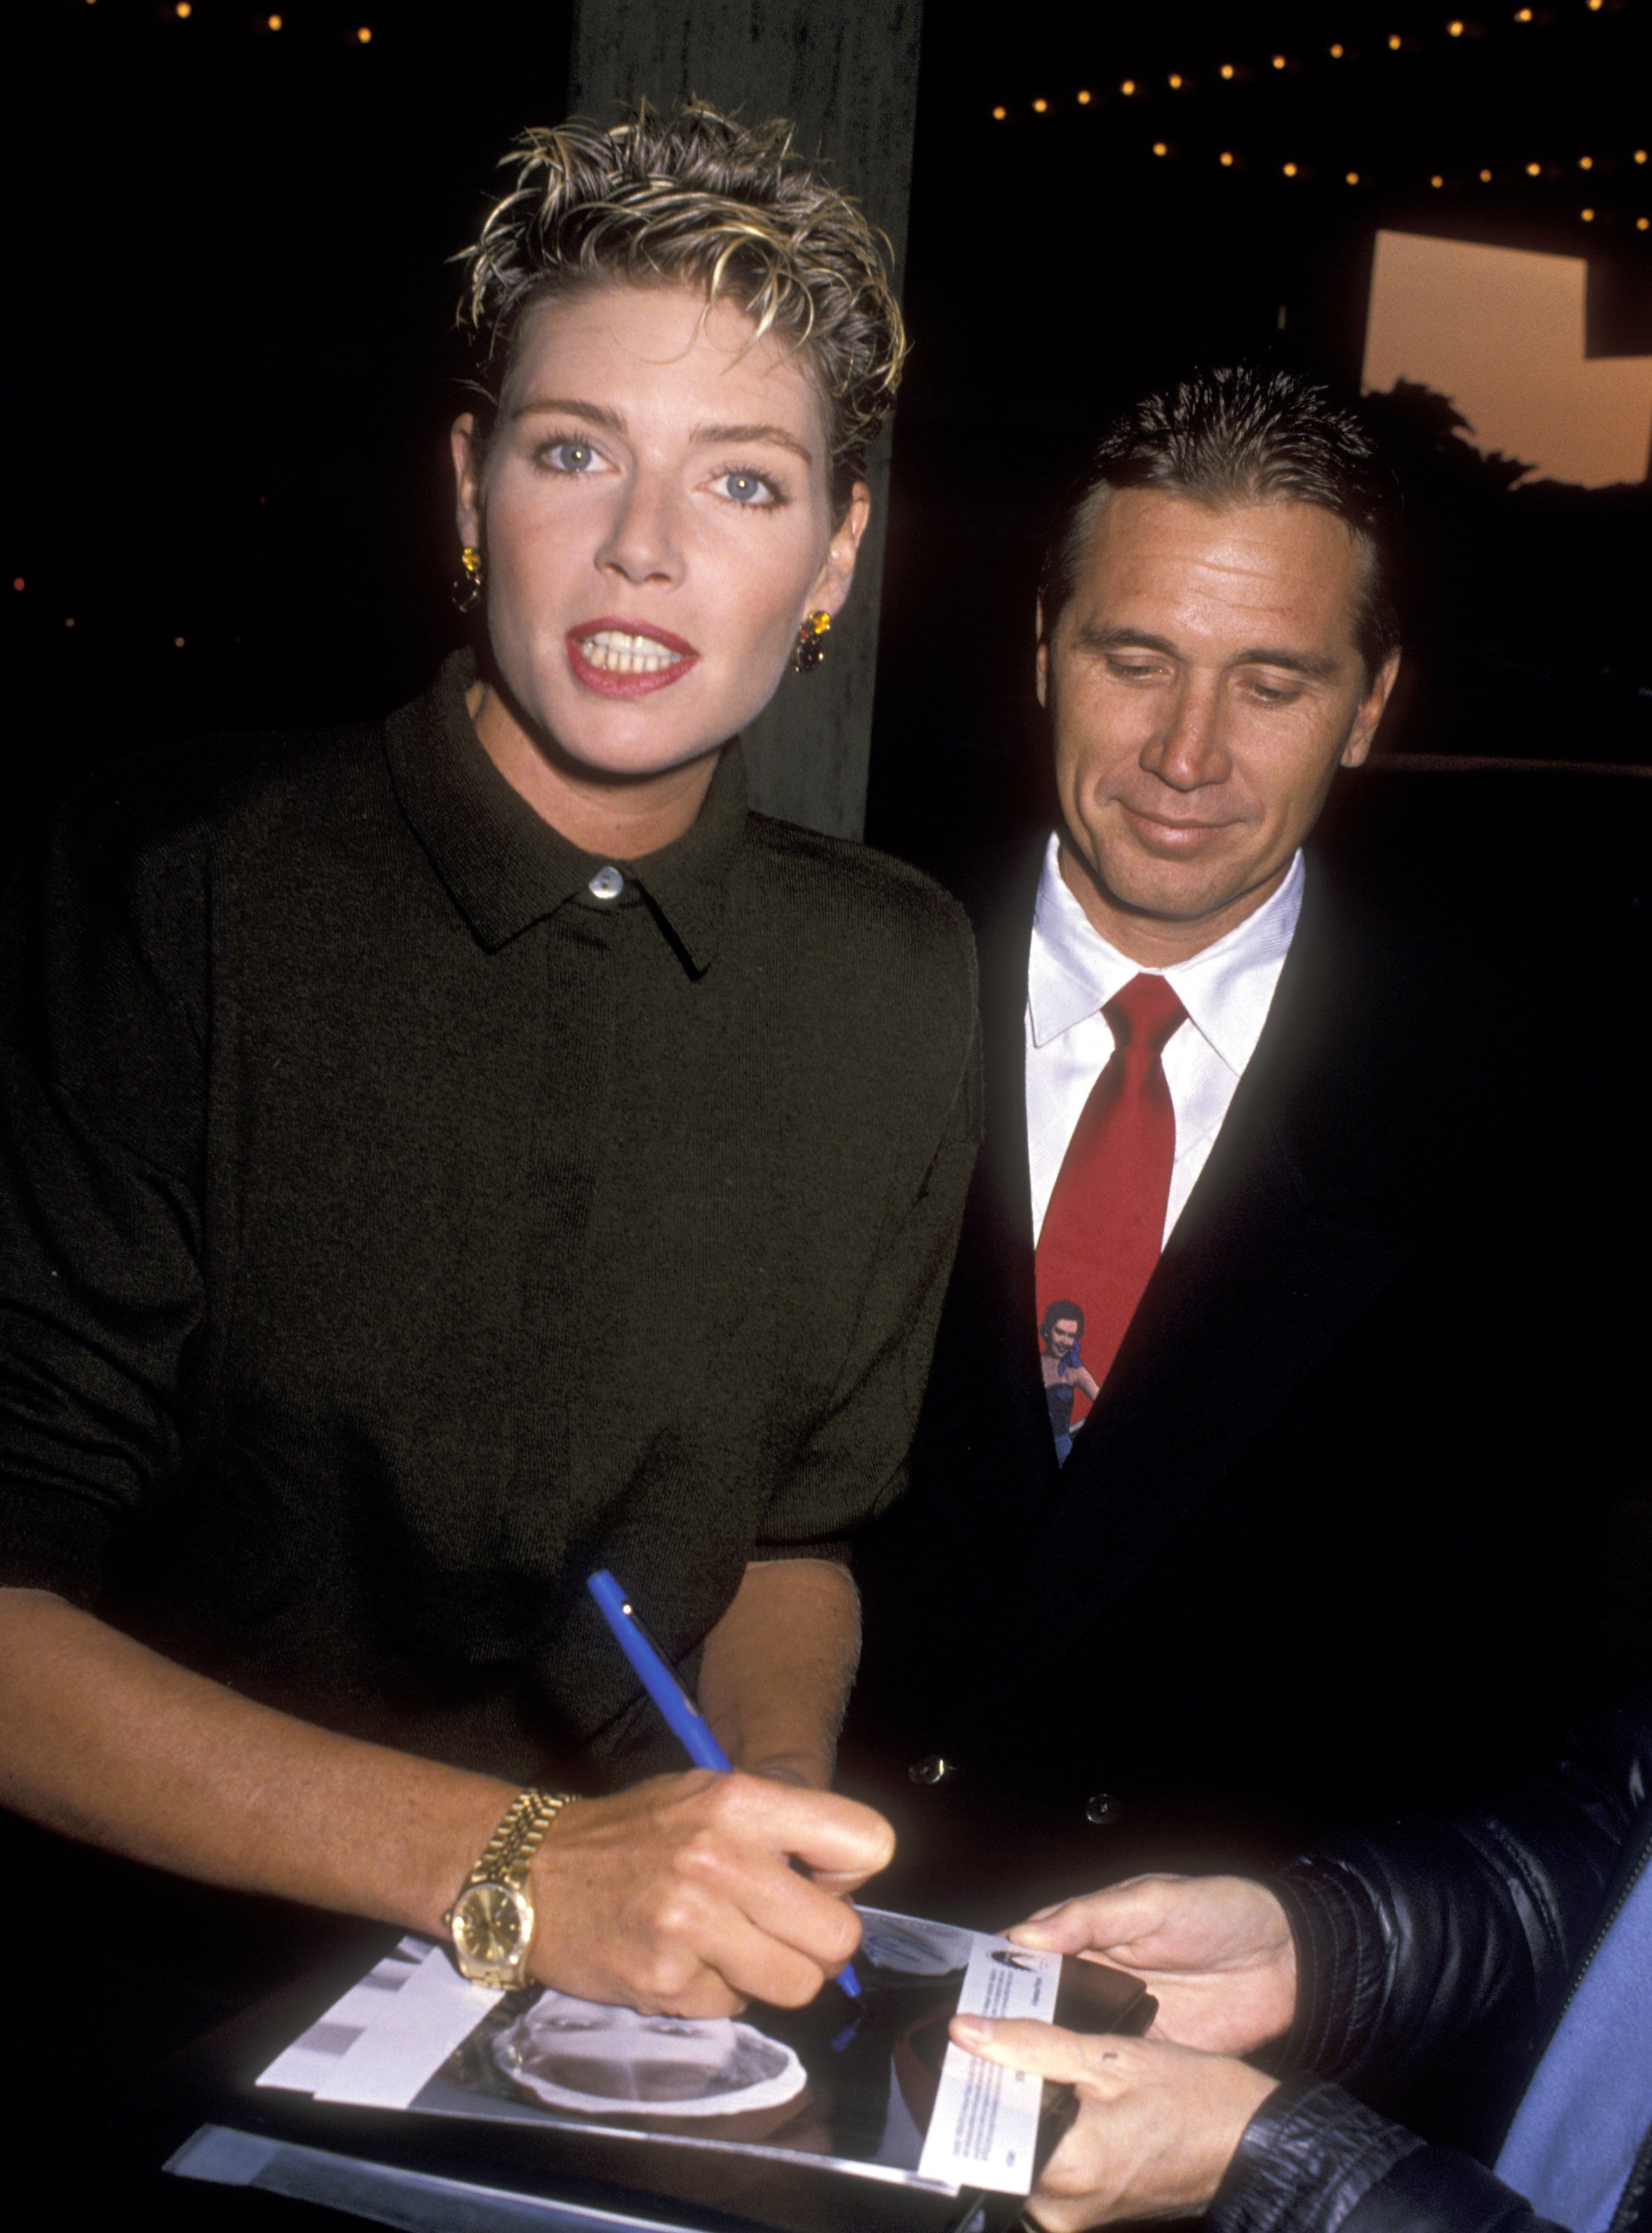 Kelly McGillis and Fred Tillman at the "Winter People" premiere on April 13, 1989 | Source: Getty Images